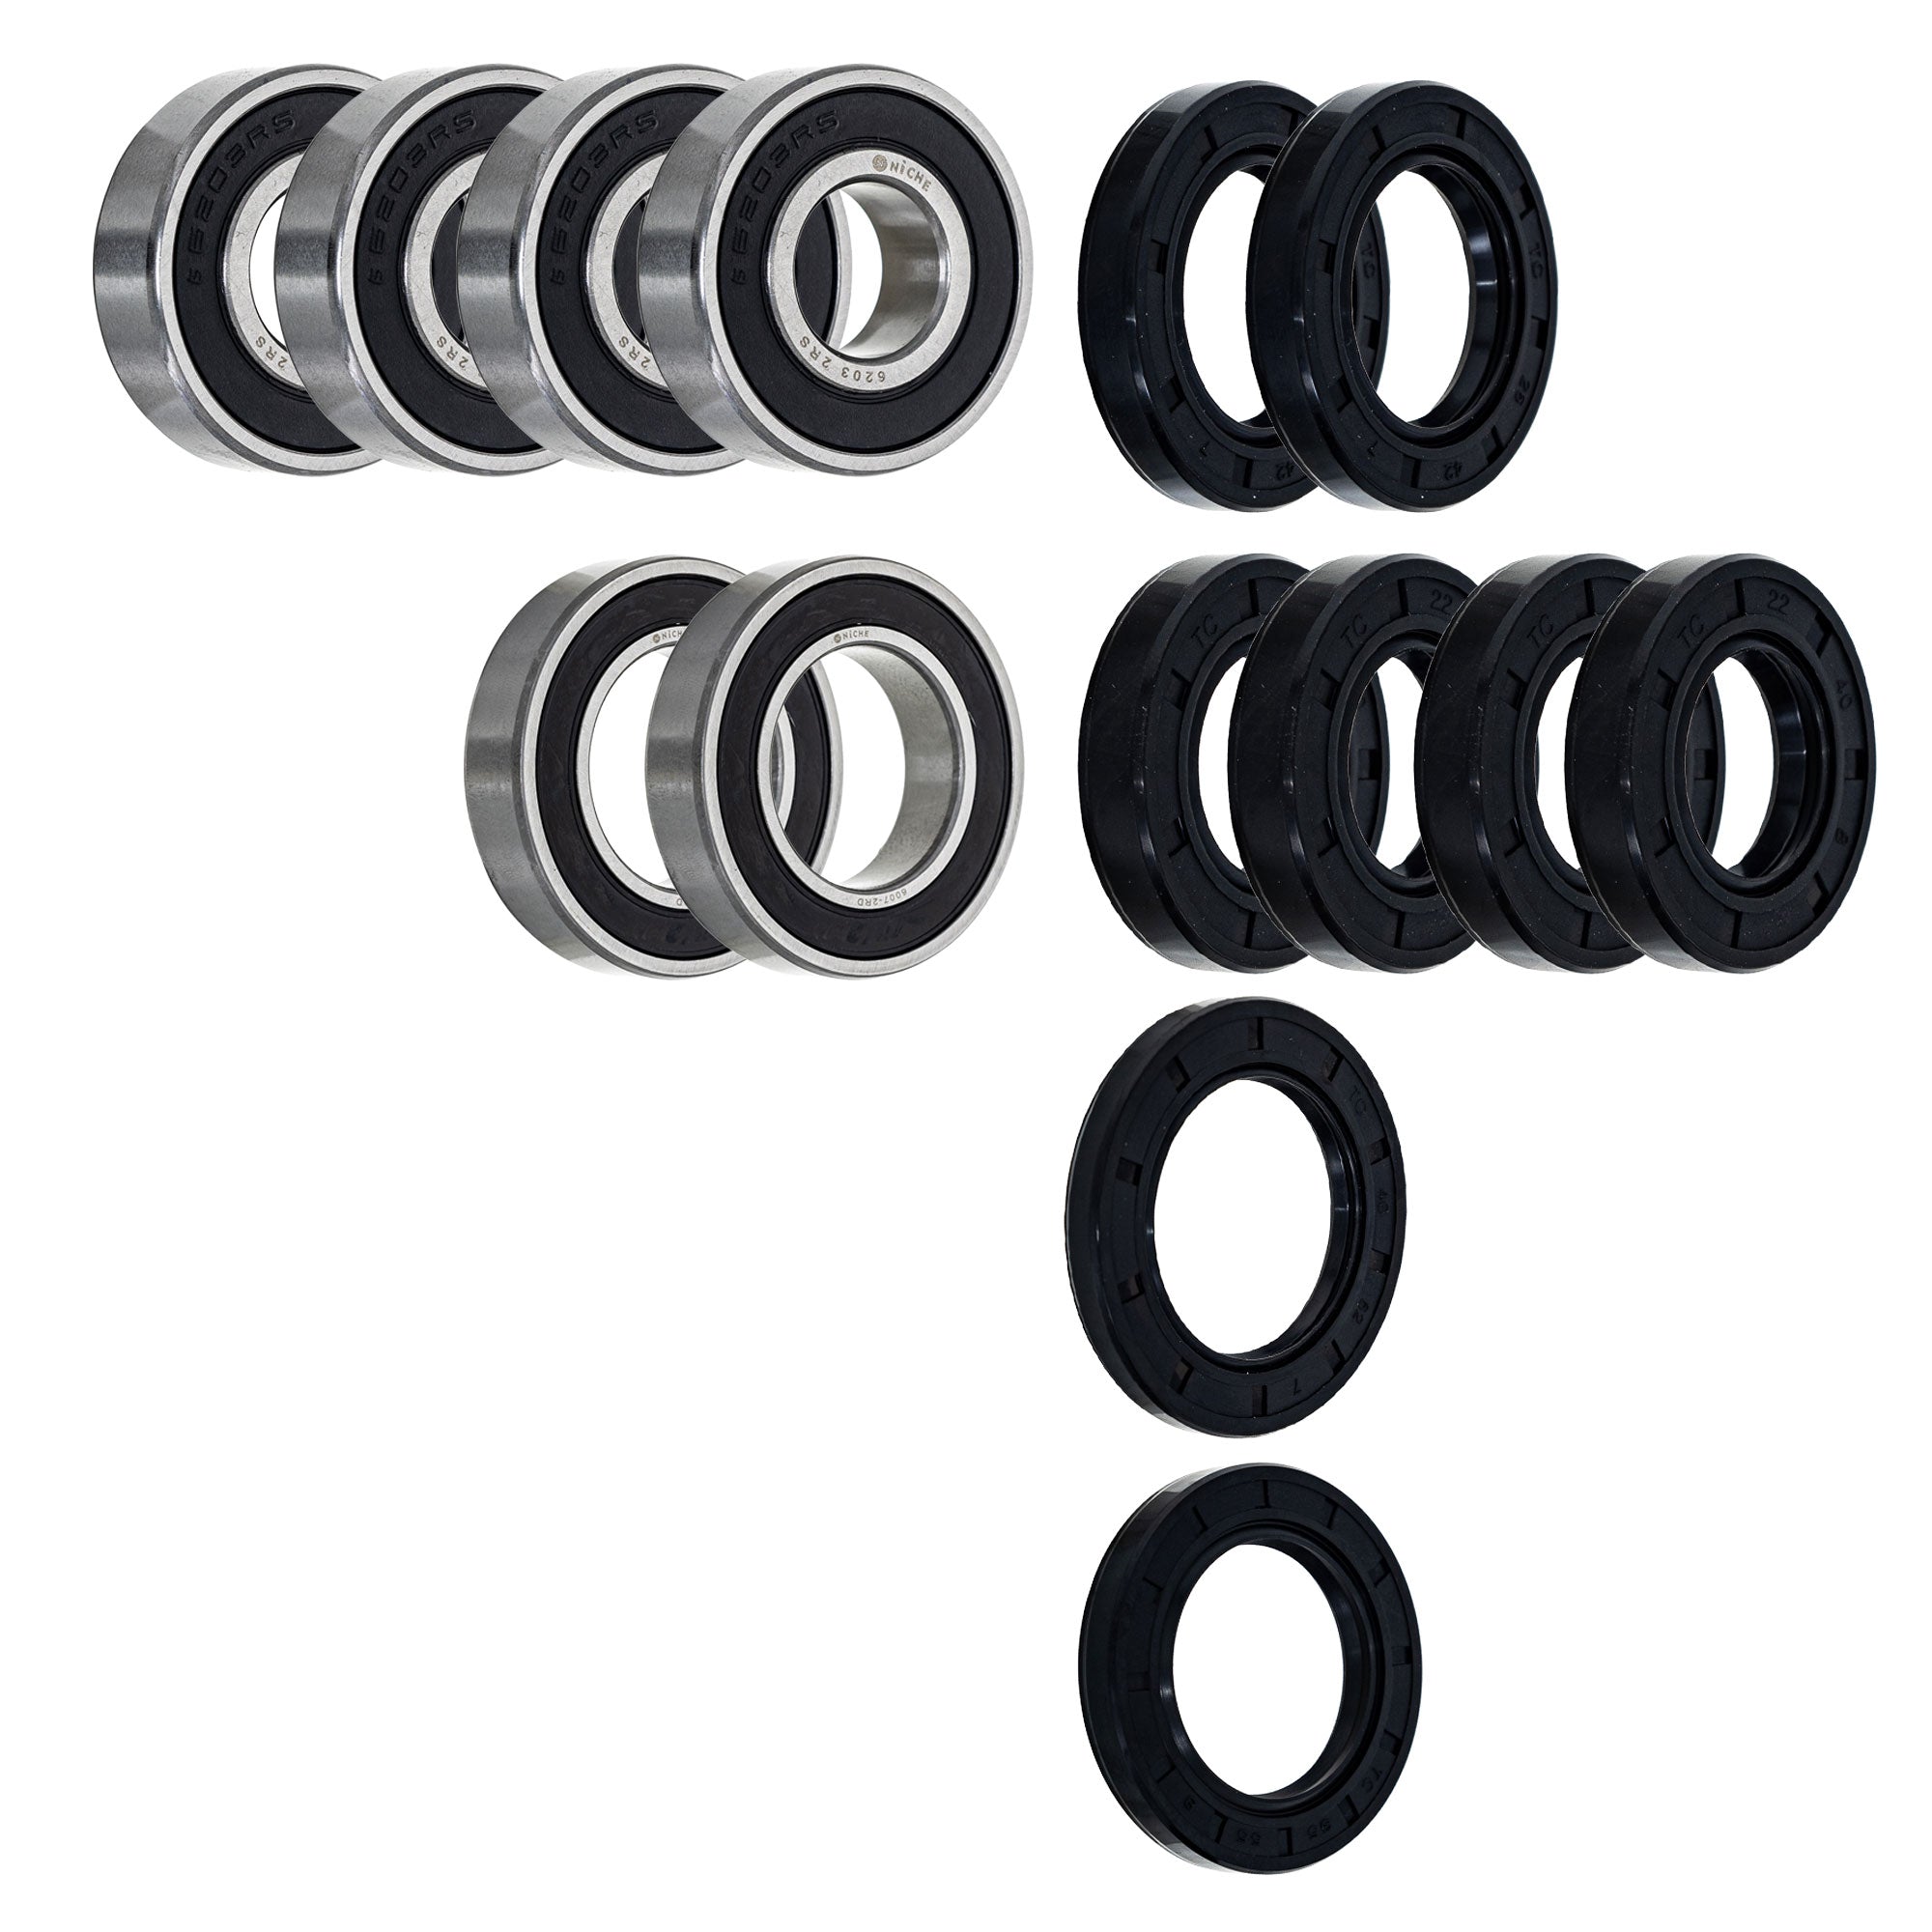 Wheel Bearing Seal Kit for zOTHER Ref No Mojave NICHE MK1008374